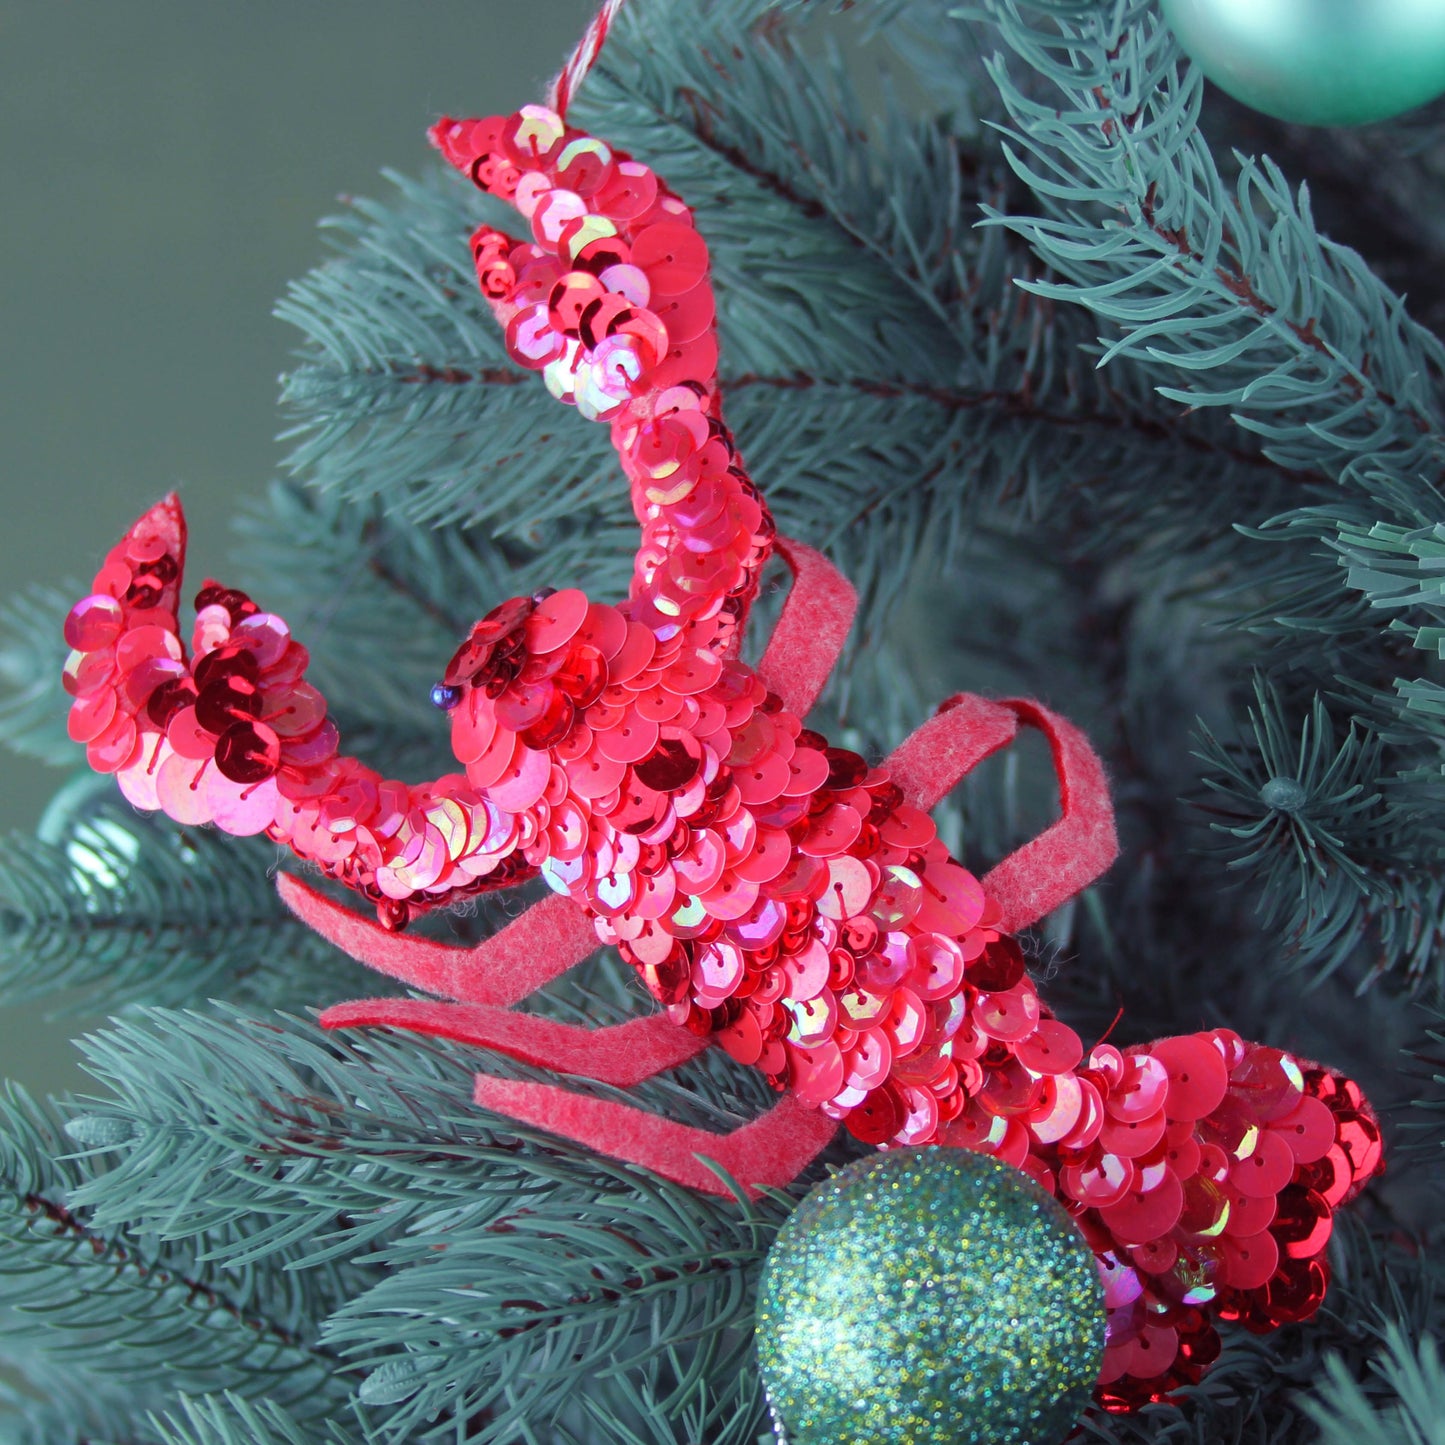 Lobster Sequin Decoration, a red sequinned lobster ornament